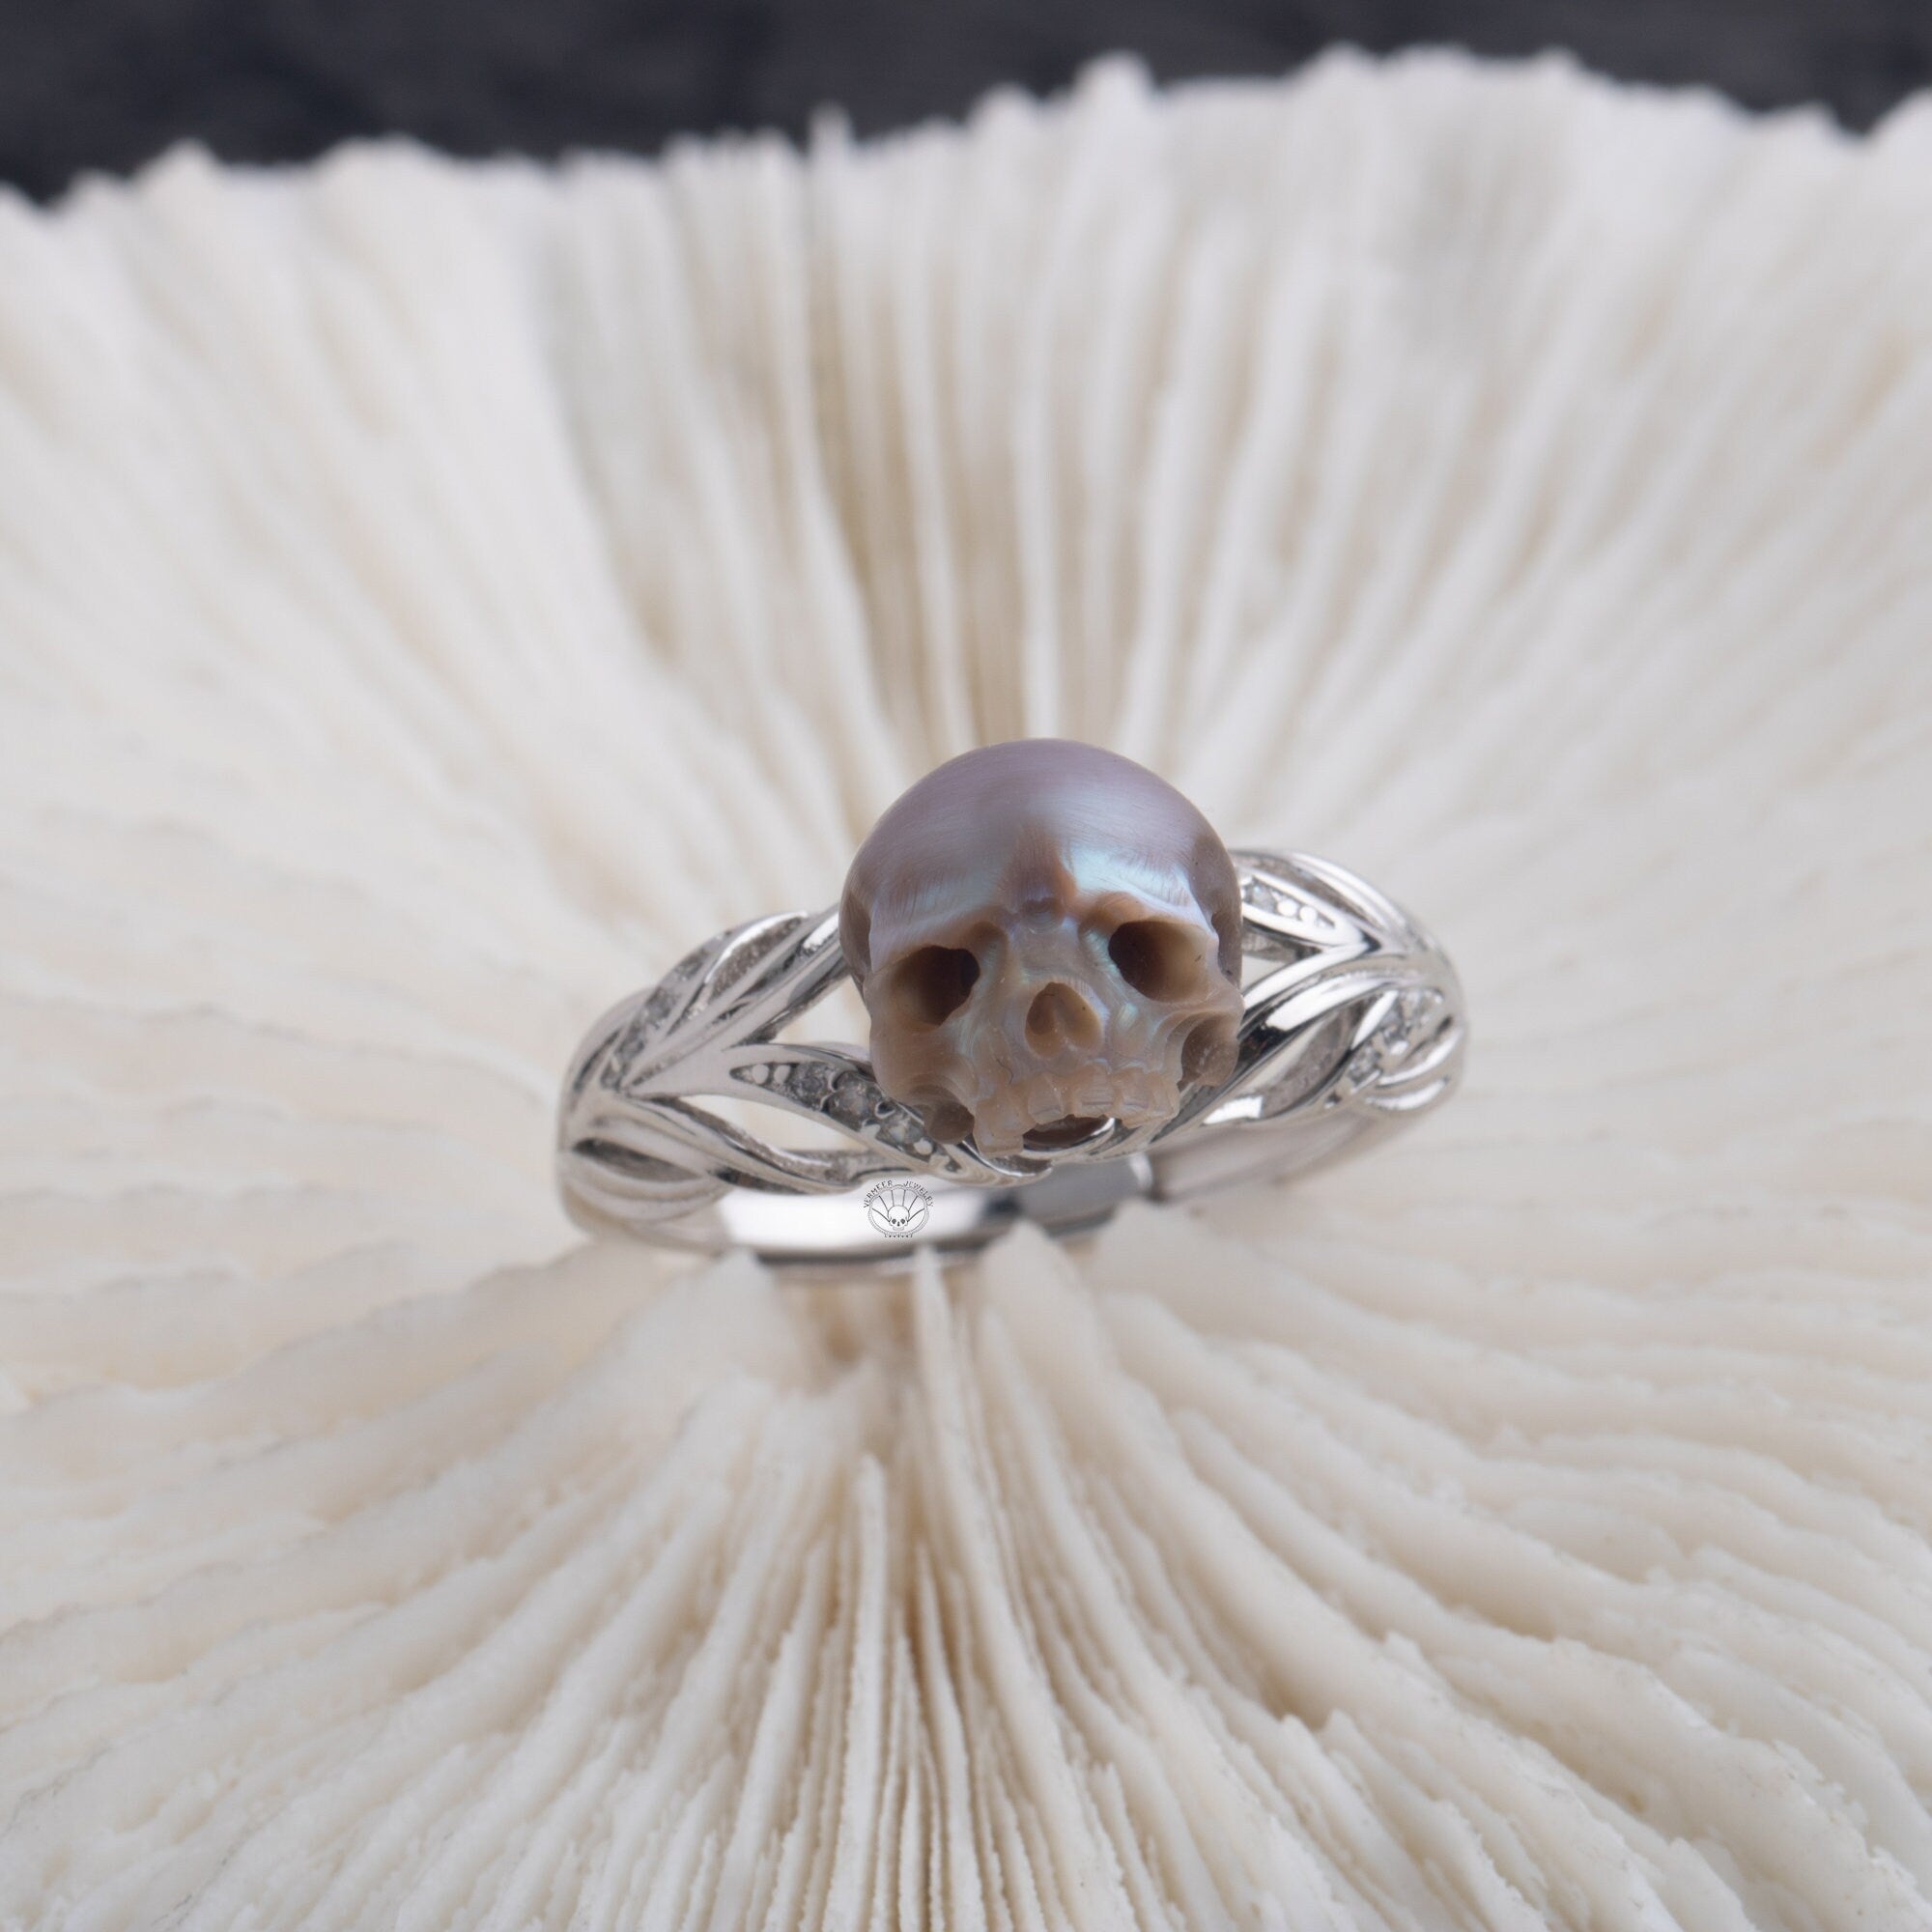 The Princess Ring handmade 925 silver skull carved pearl ring